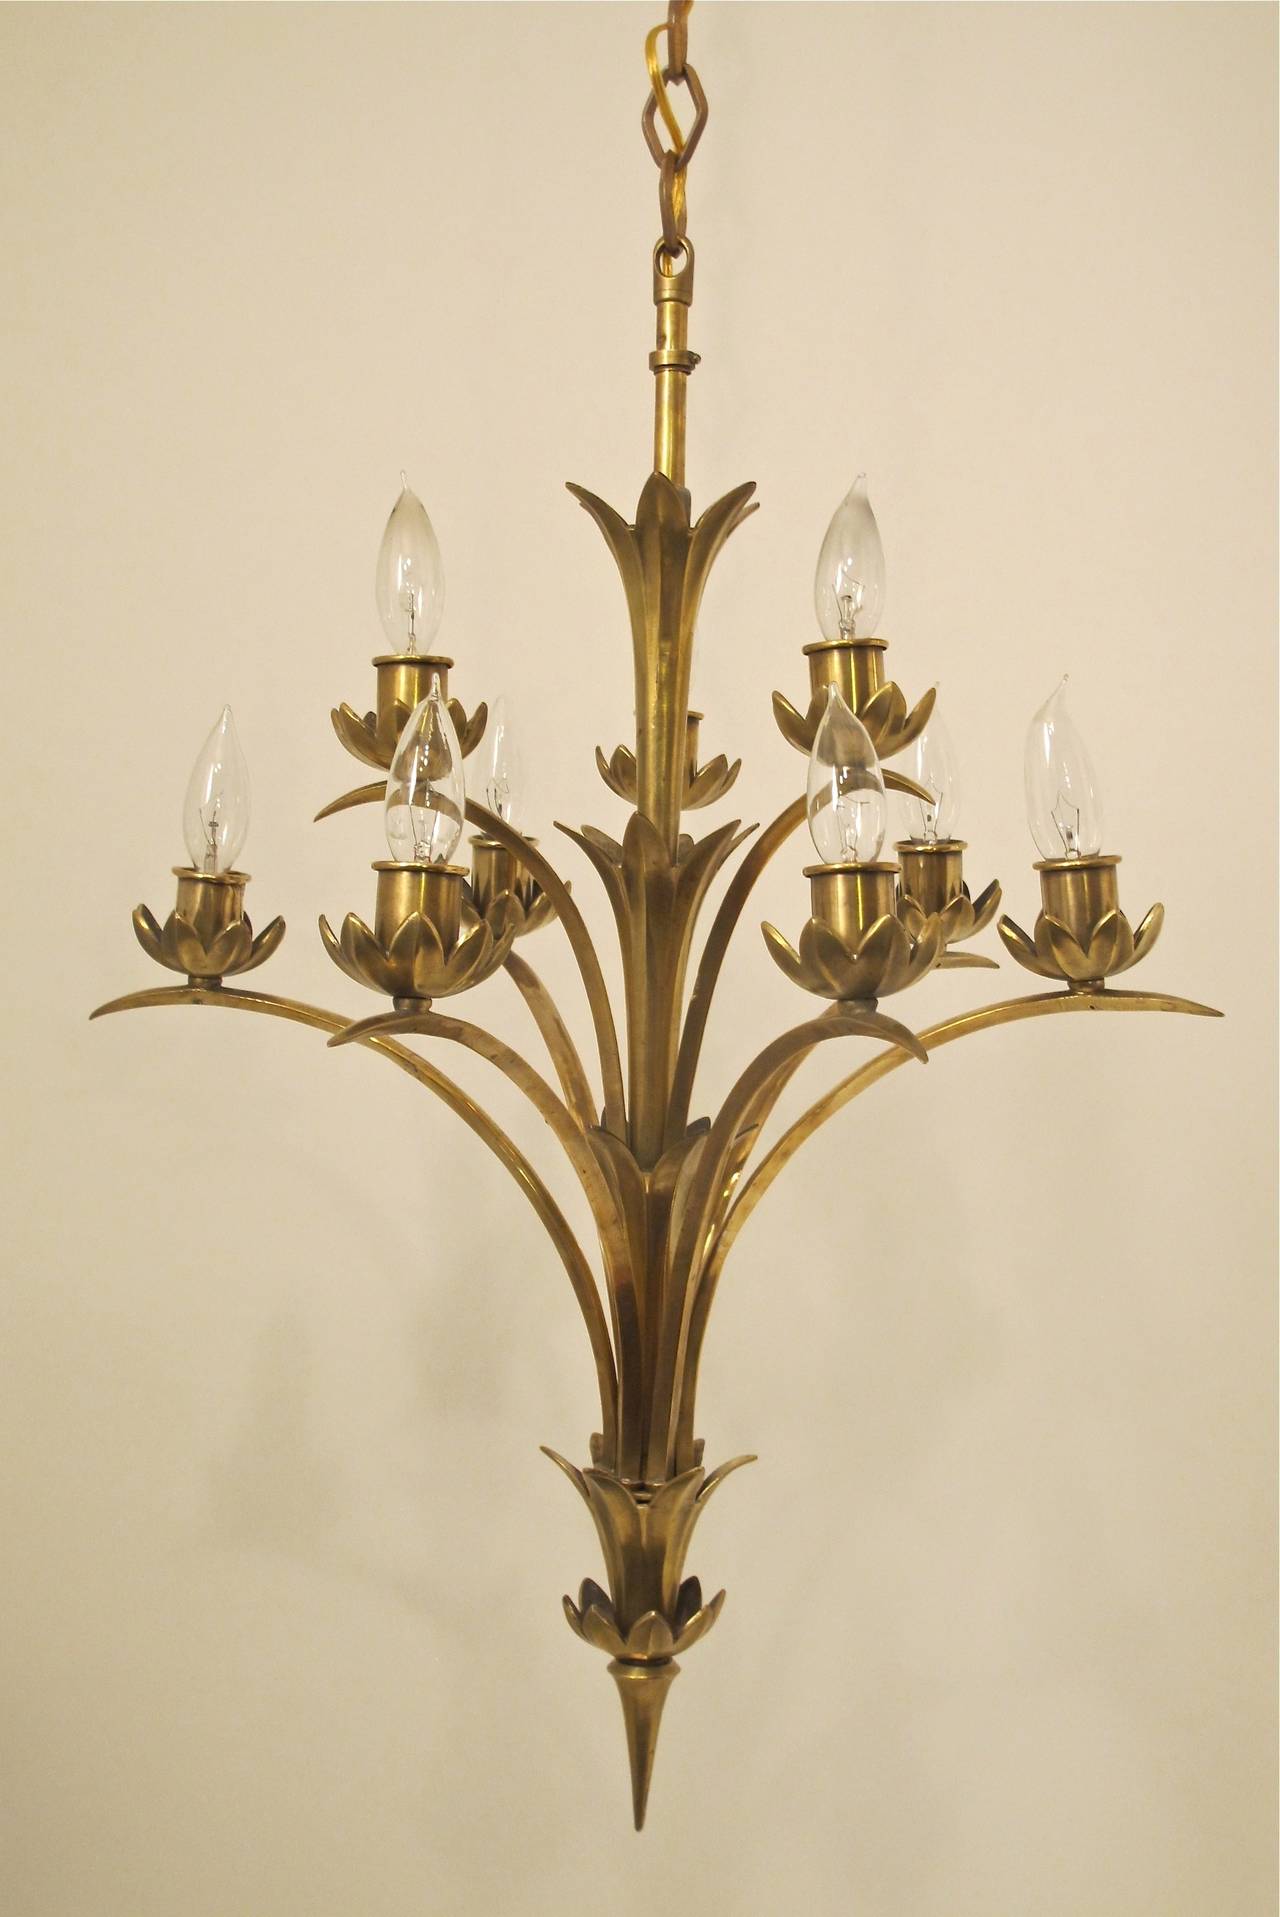 Art Moderne period brass ceiling light of exceptional design. Newly re-wired, holds chandelier size light bulbs. European, 1930's.